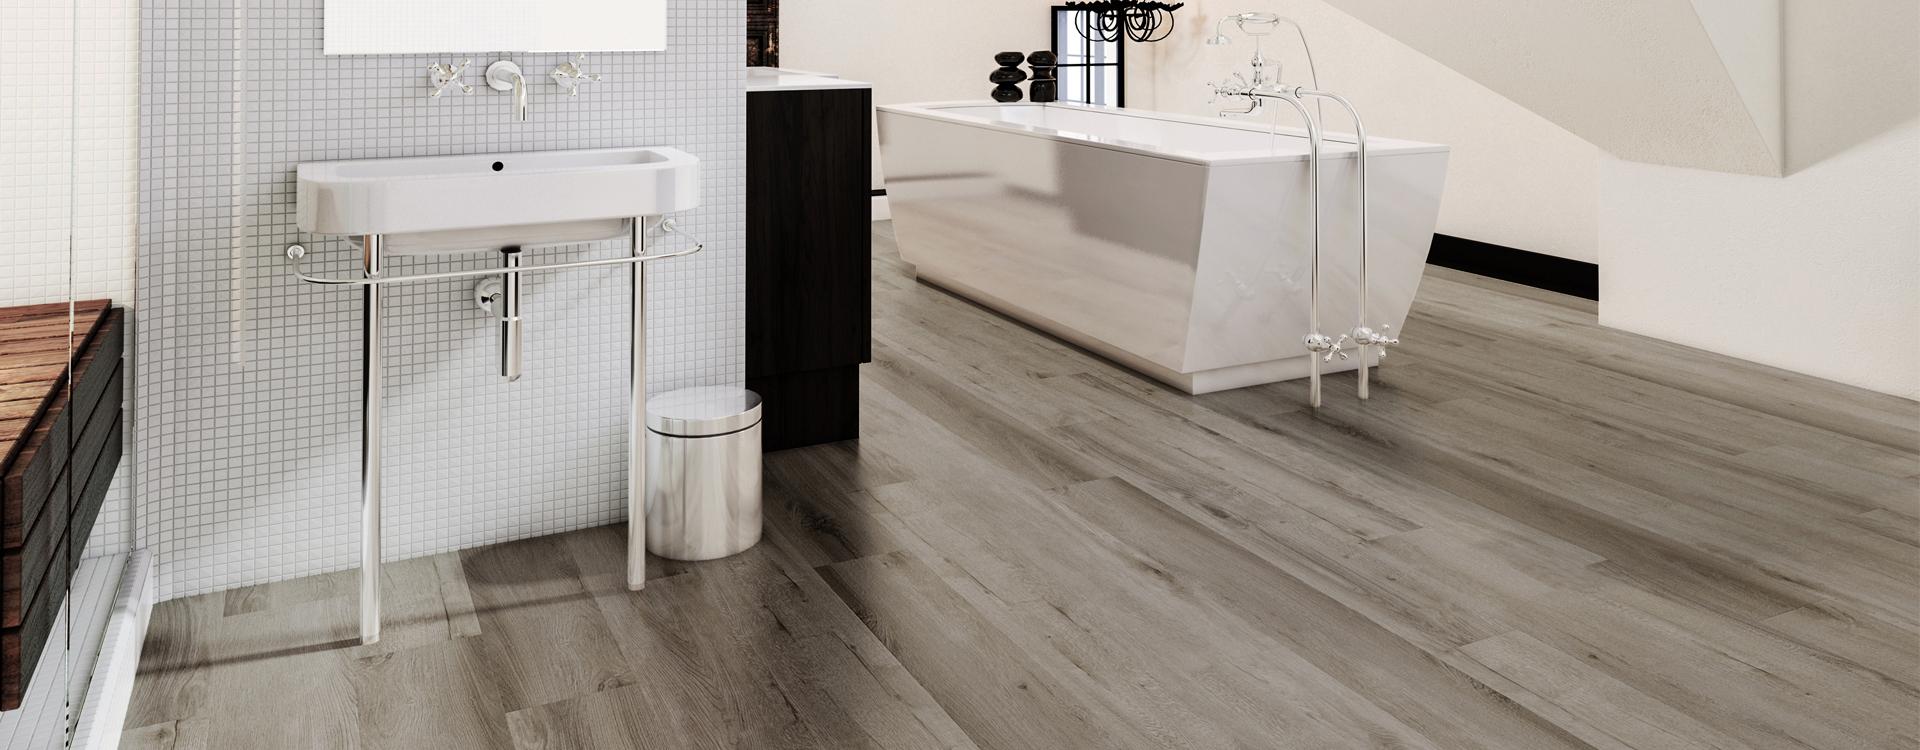 Horizen Flooring presents to you a picture of a quality wide plank Telluride luxury vinyl plank. NovoCore Premium EIR collection features a wide range of colors & designs that will compliment any interior. Natural wood grain synchronized surface allow for an authentic hardwood look & feel. This collection features a 0.25″ / 6.5 mm overall thickness and a durable 22 mil / 0.55 mm wear layer for residential and commercial applications.